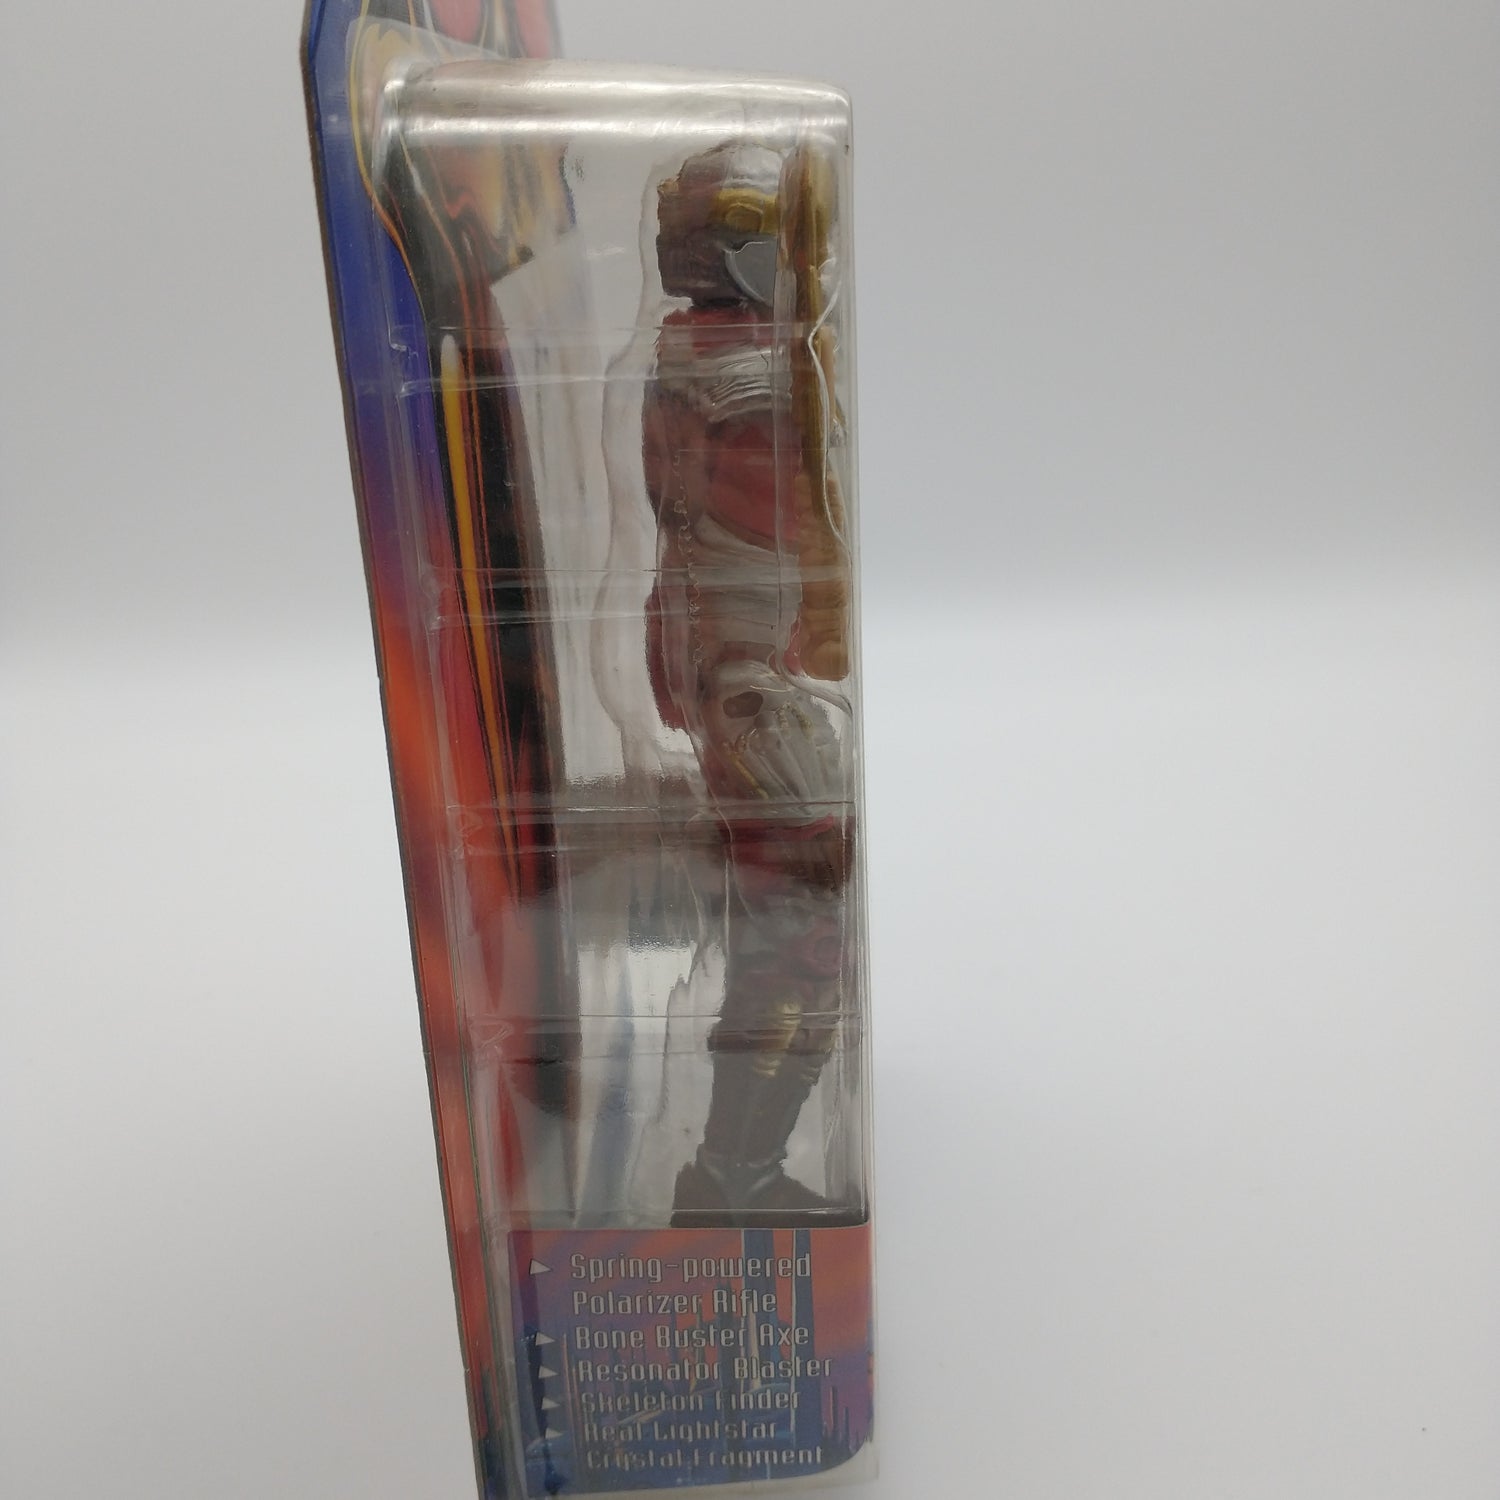 A picture of the side of the cart and bubble. The action figure is inside.